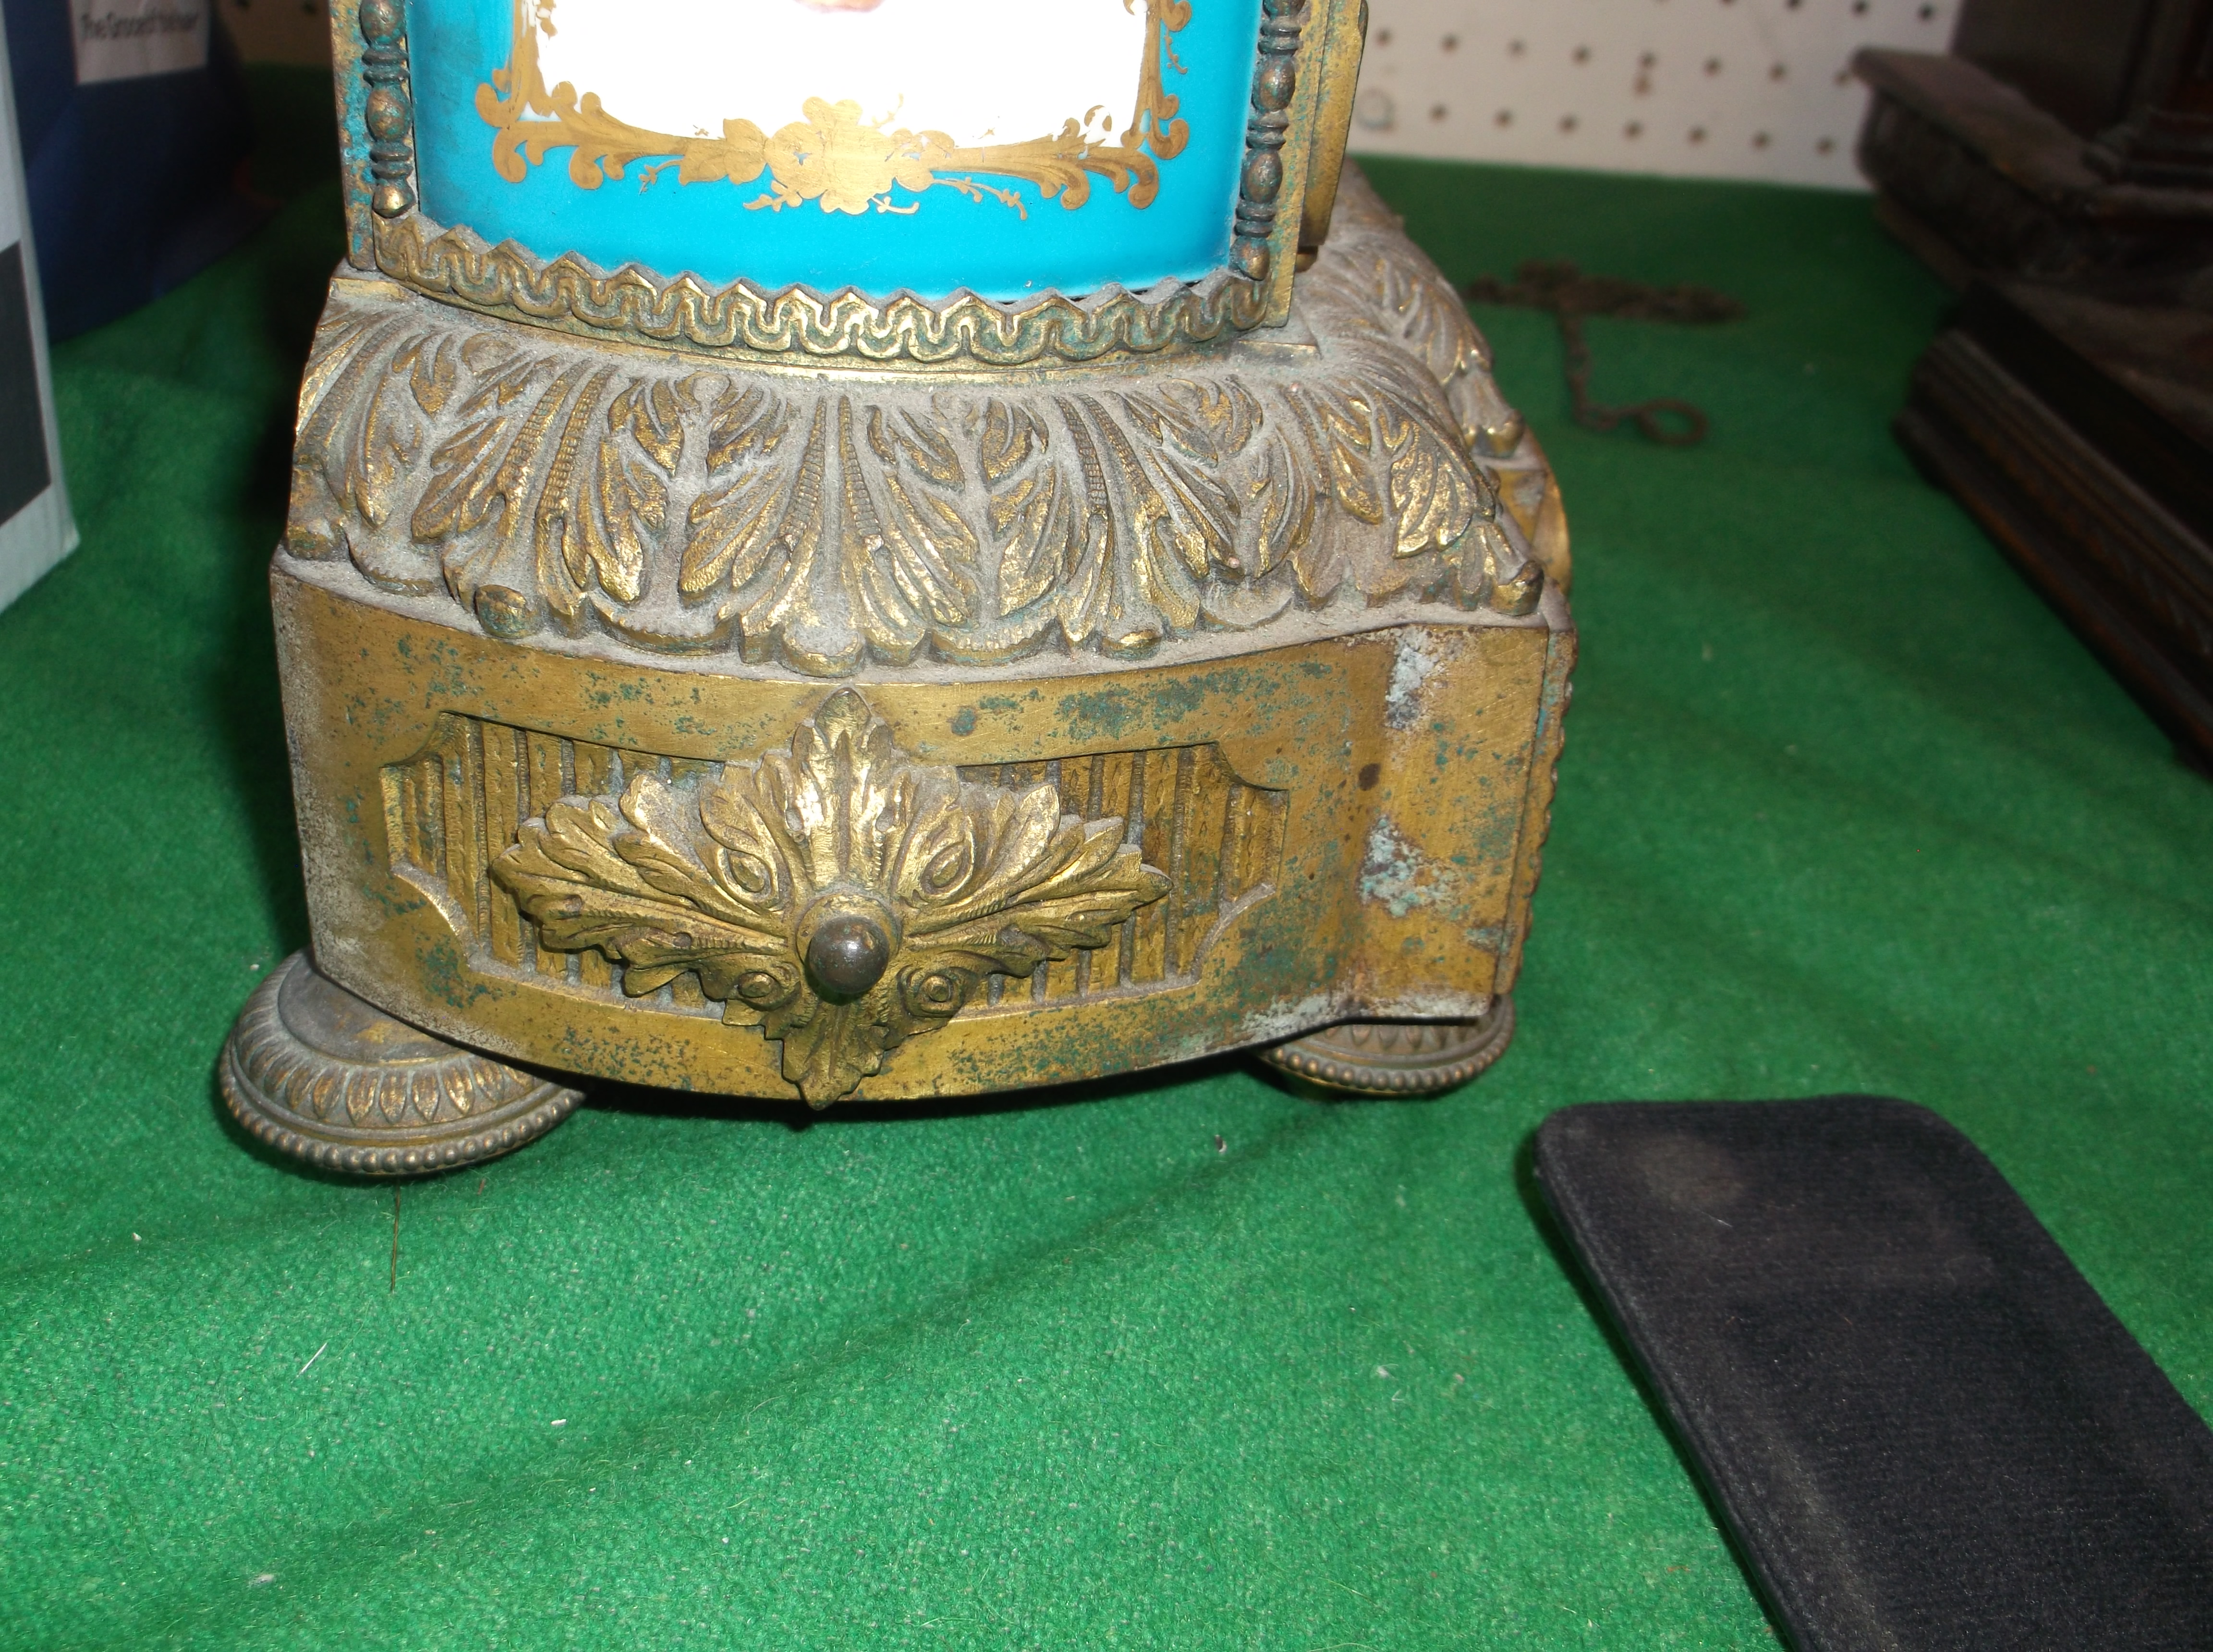 A 19th Century French gilt brass cased mantel clock set with hand-painted Sèvres style porcelain - Image 19 of 28